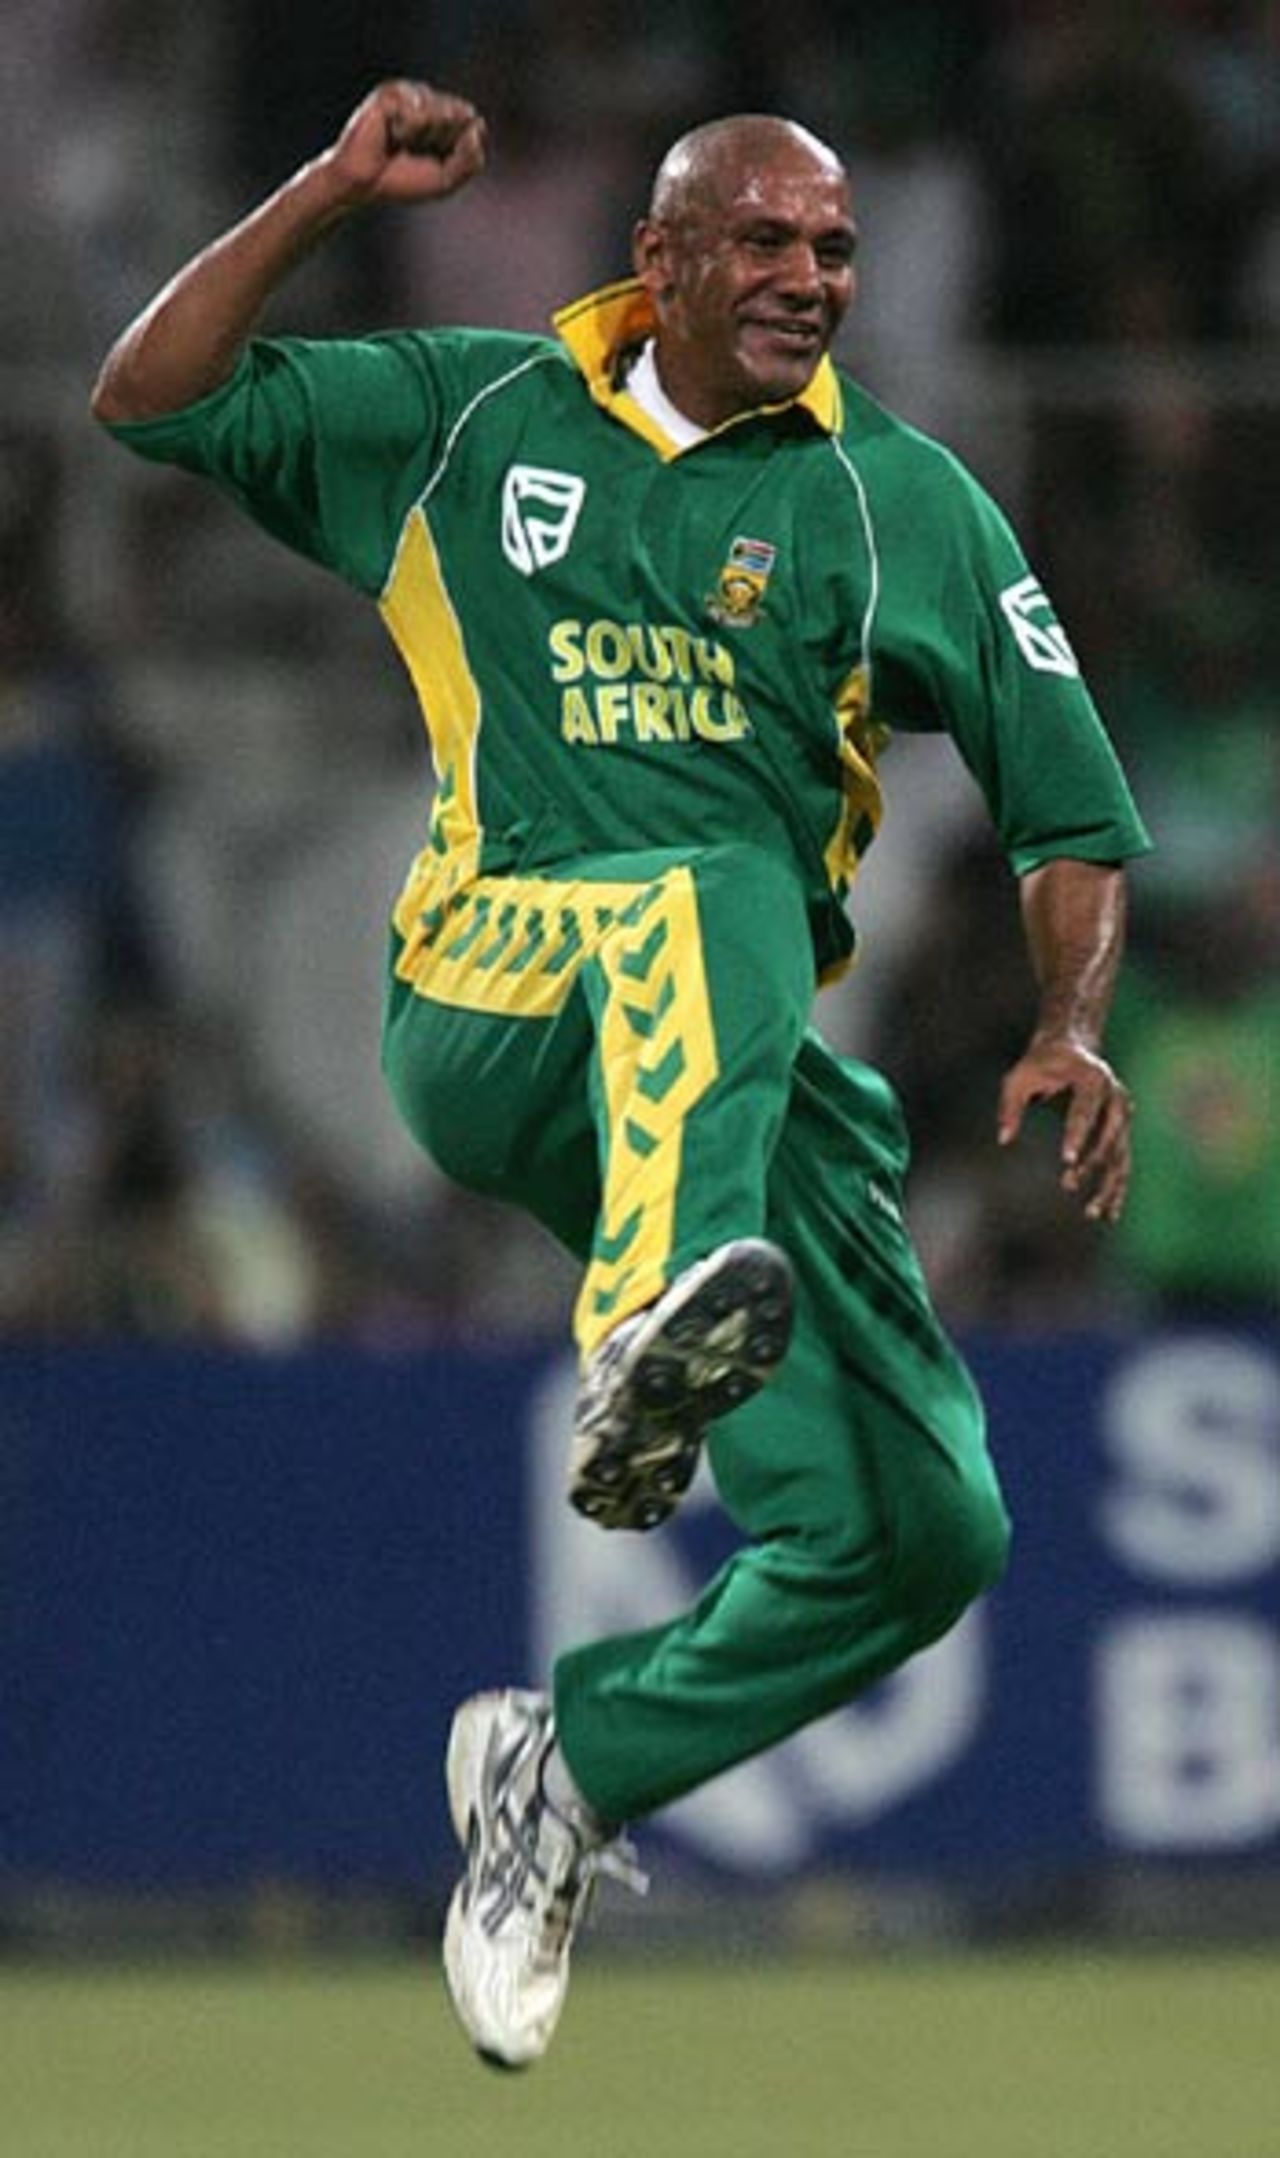 Roger Telemachus celebrates another wicket, South Africa v Australia, 4th ODI, Durban, 10 March, 2006